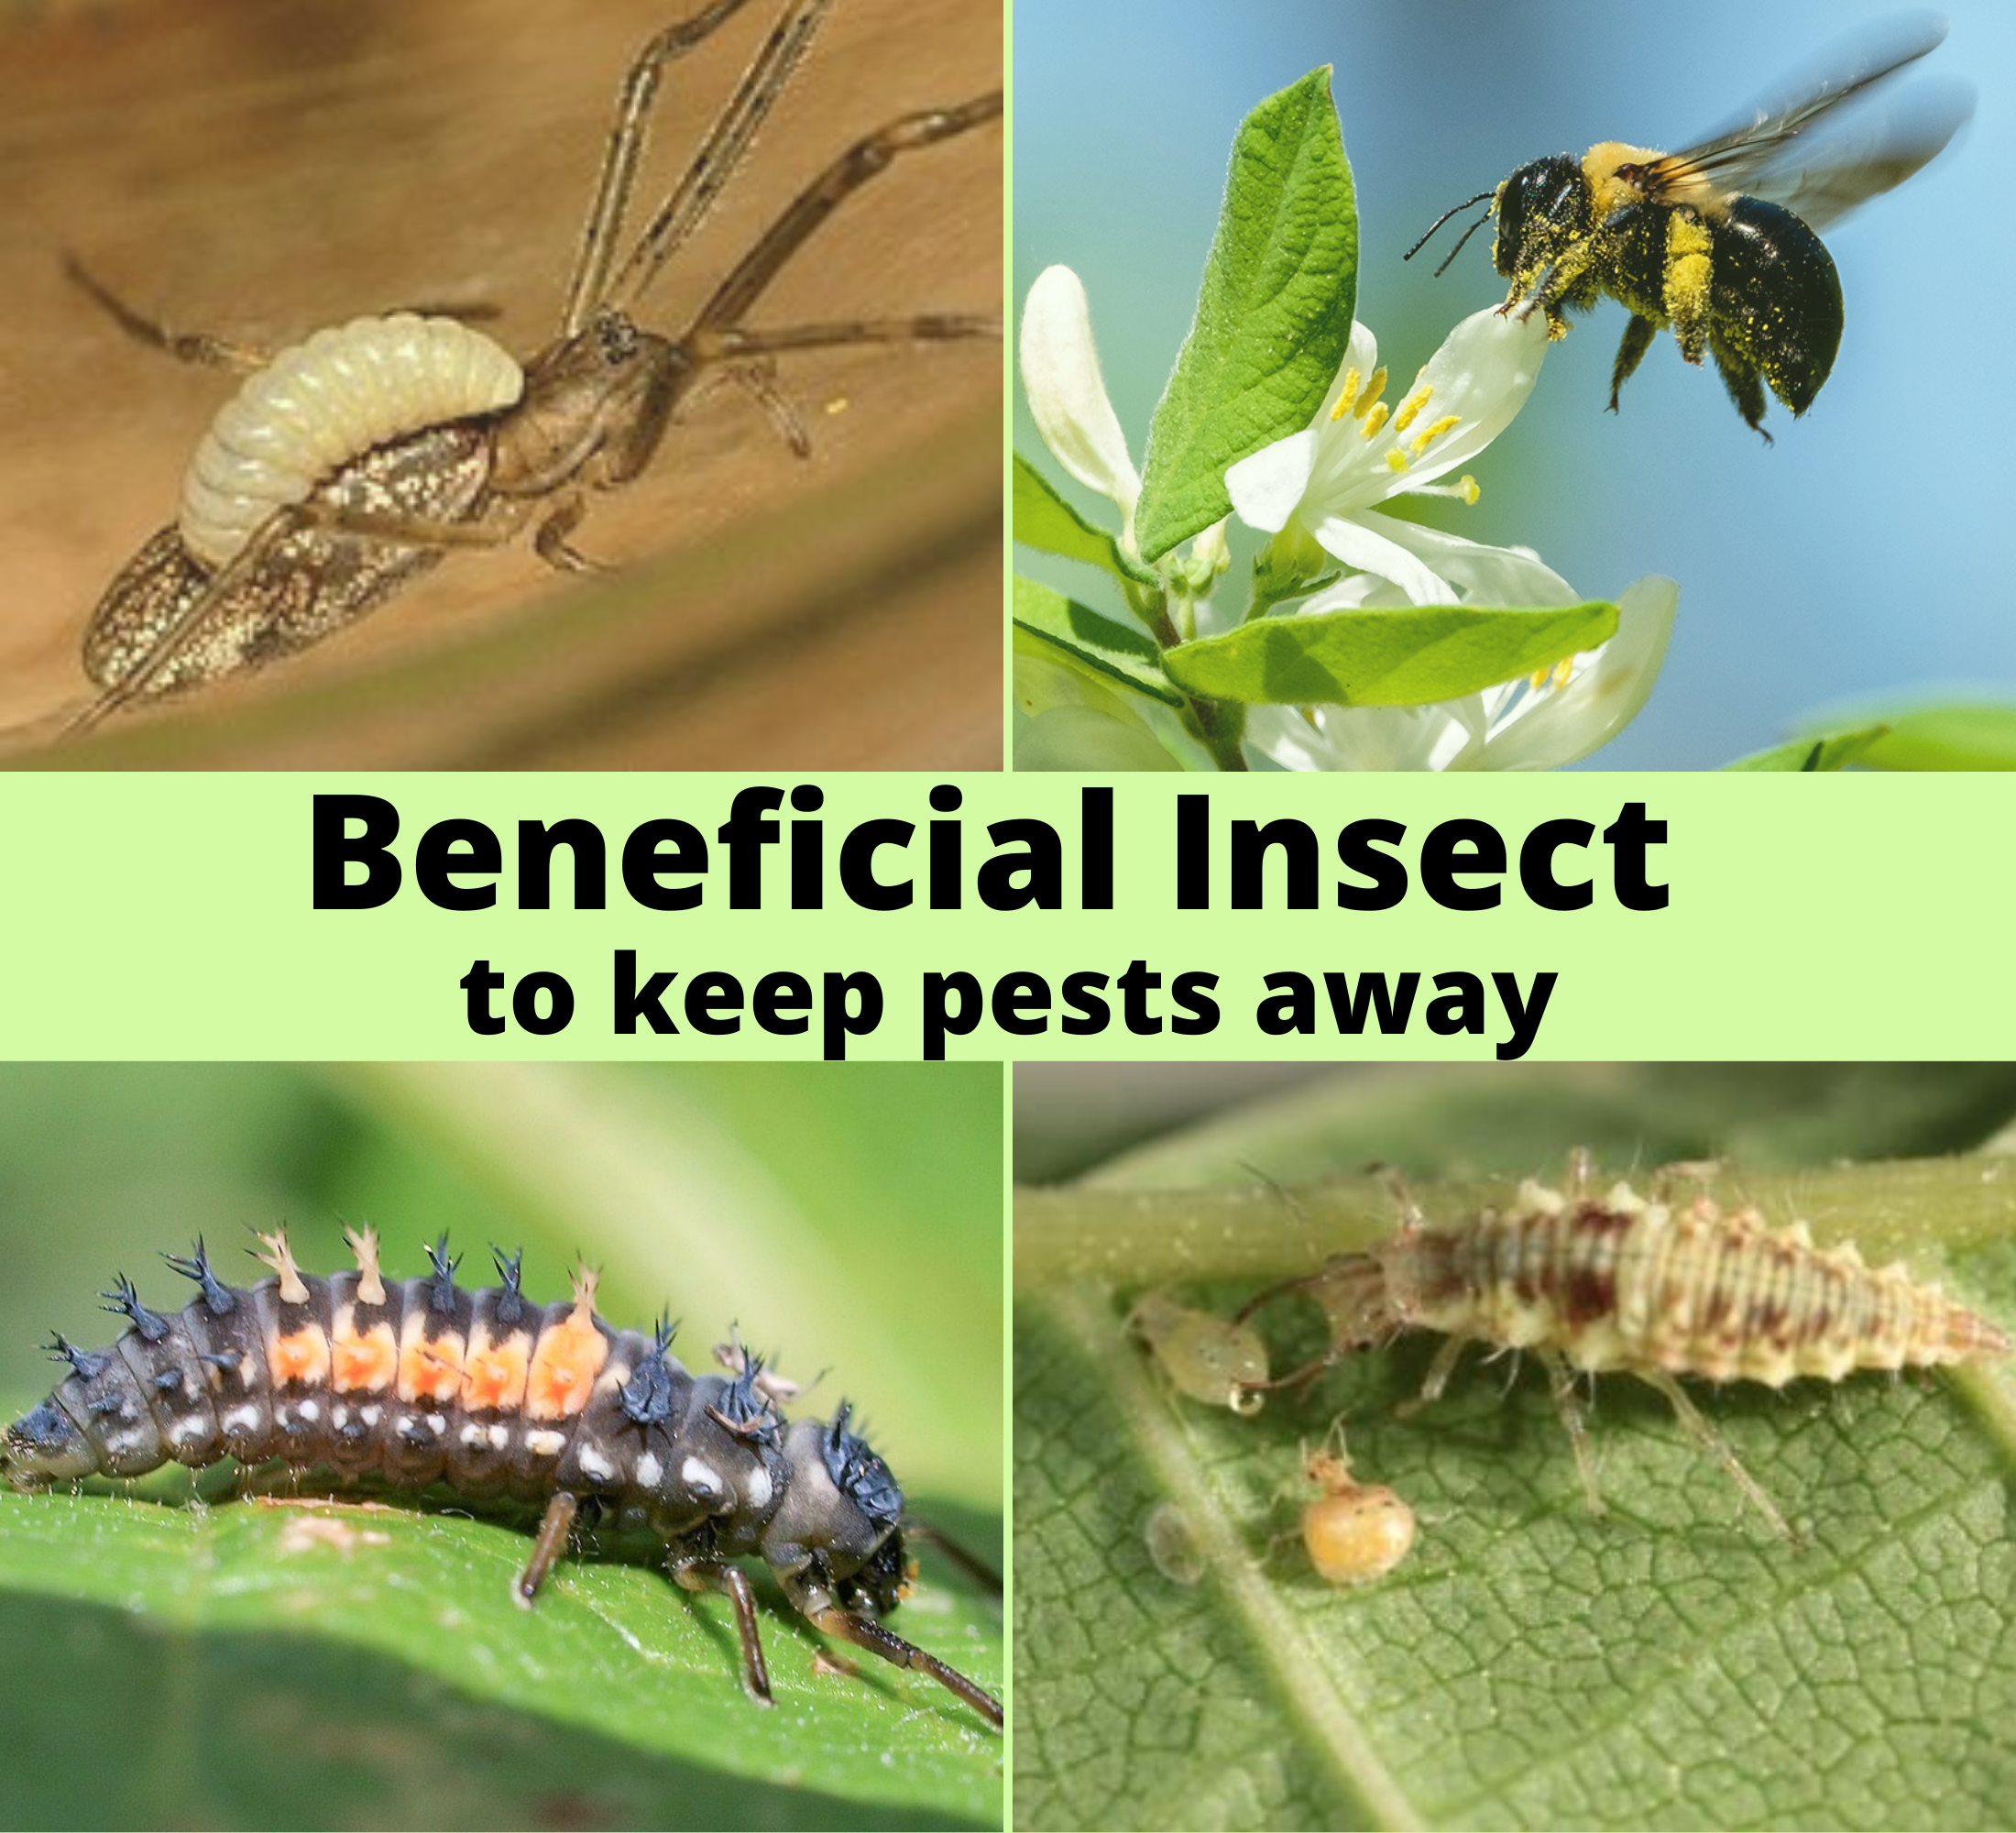 Friendly insects which used as natural Pest controllers?